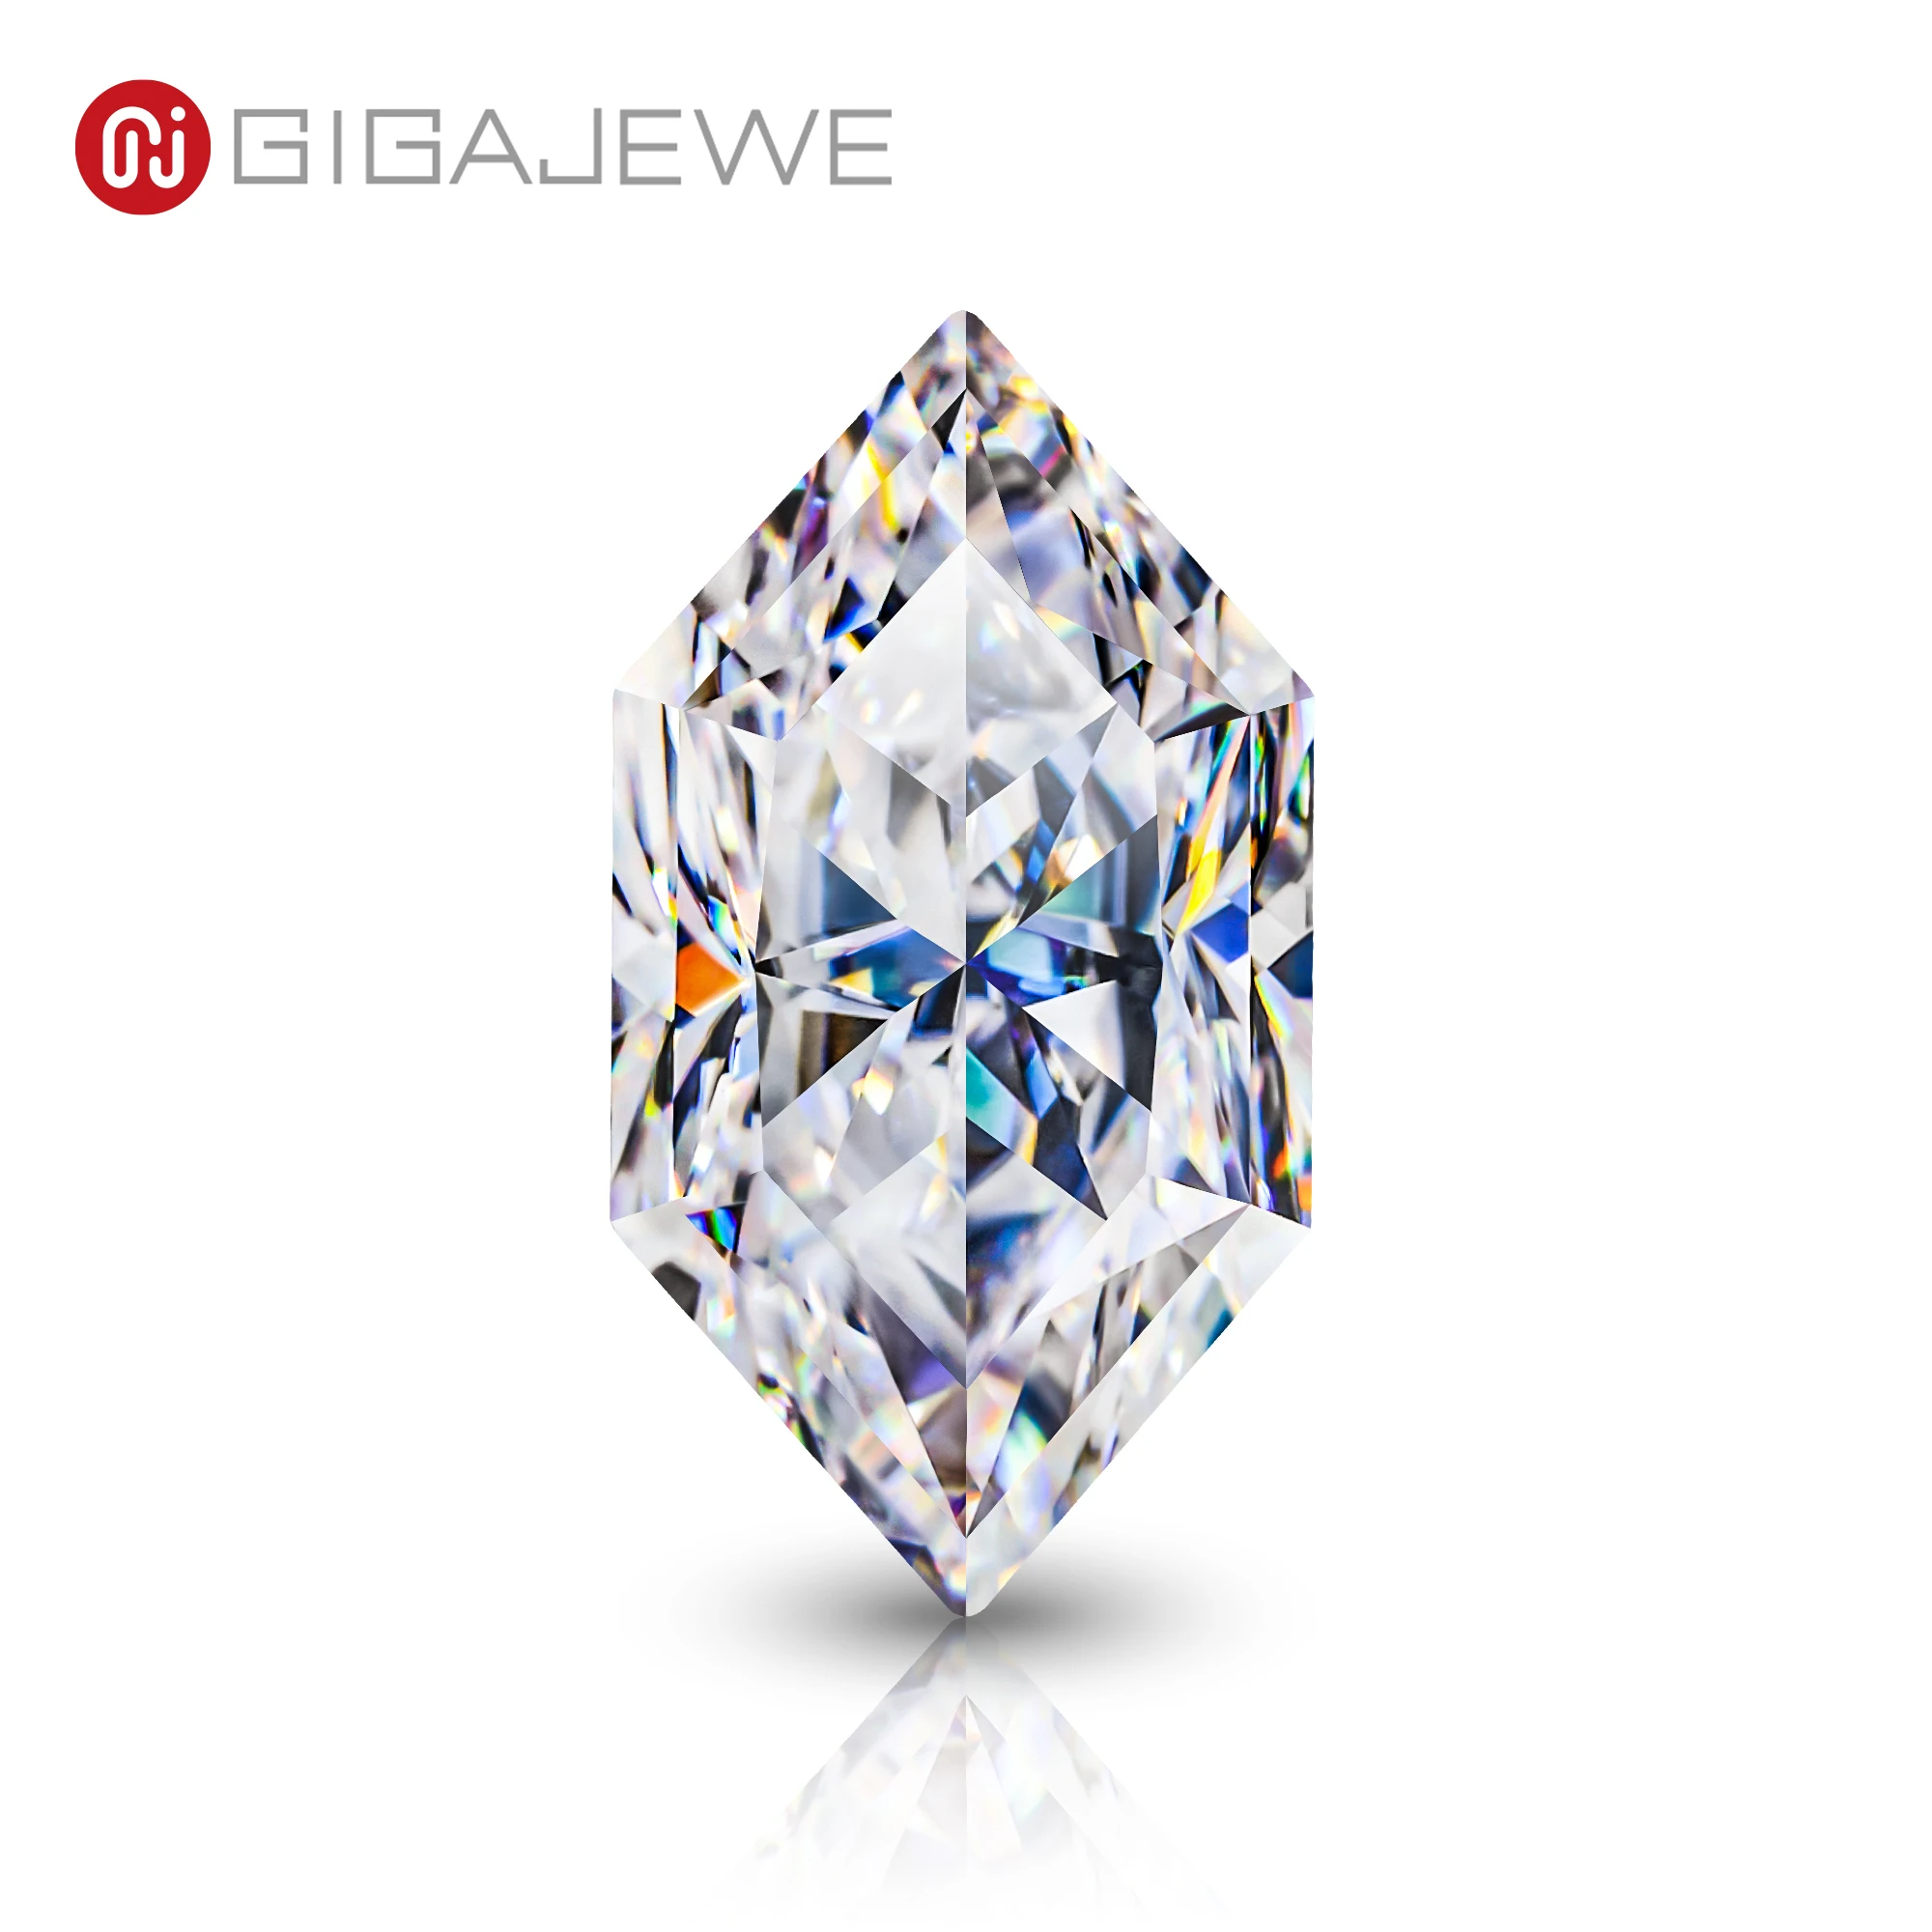 

GIGAJEWE white D color Moissanite Manual cut Dutch Marquise cut Gemstone Brilliant Stone Excellent Cut For Jewelry Making